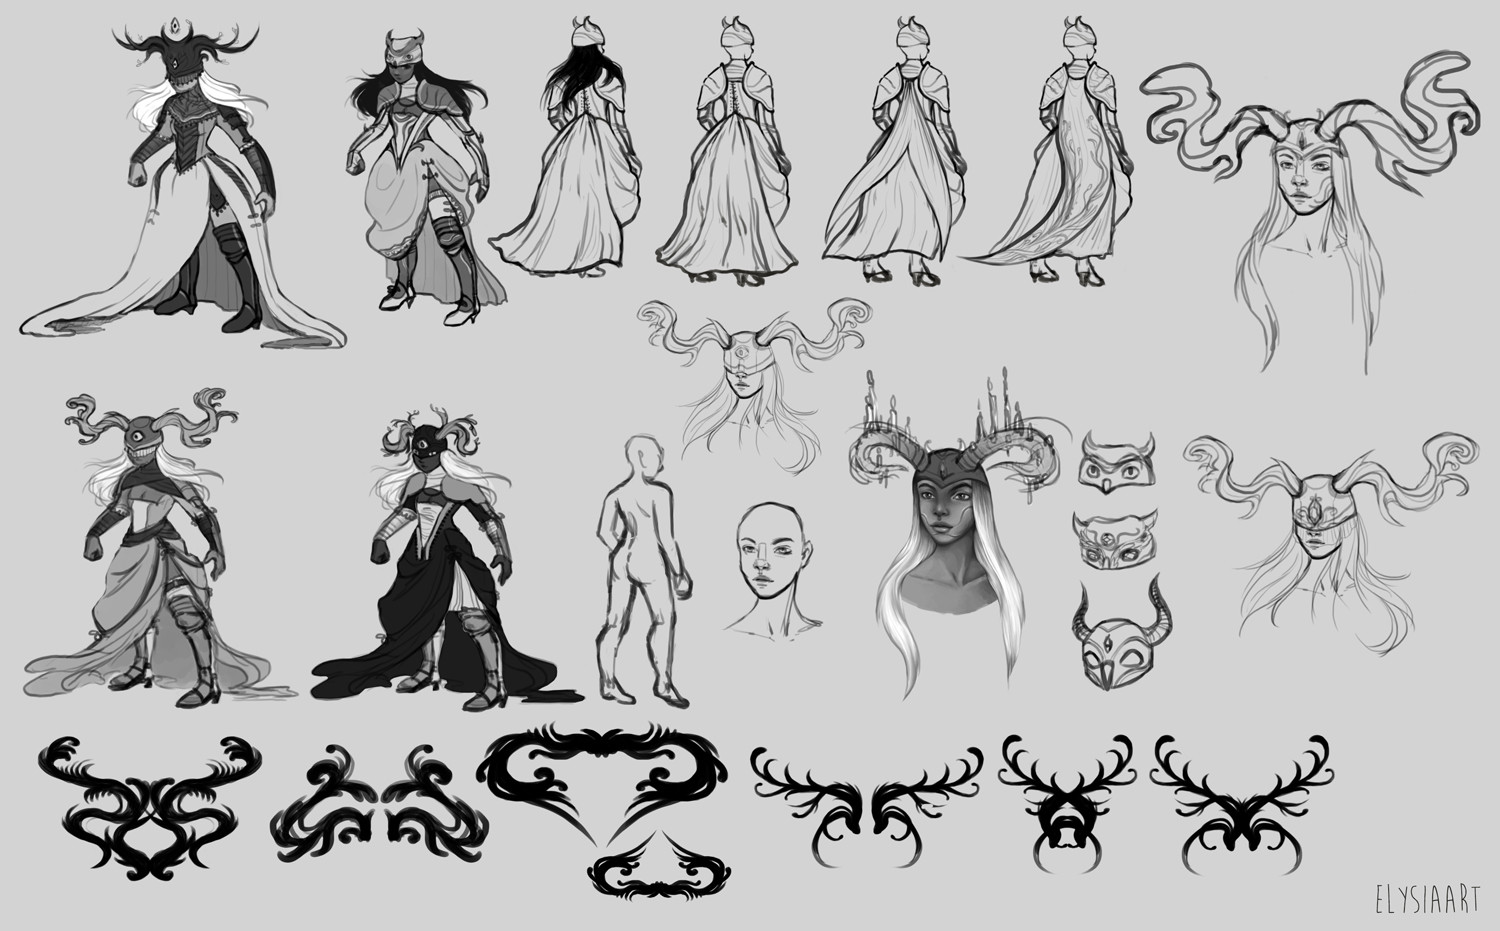 Variations on the bottom left sketch from previous image. Includes costume and hat and hat embellishment sketching!